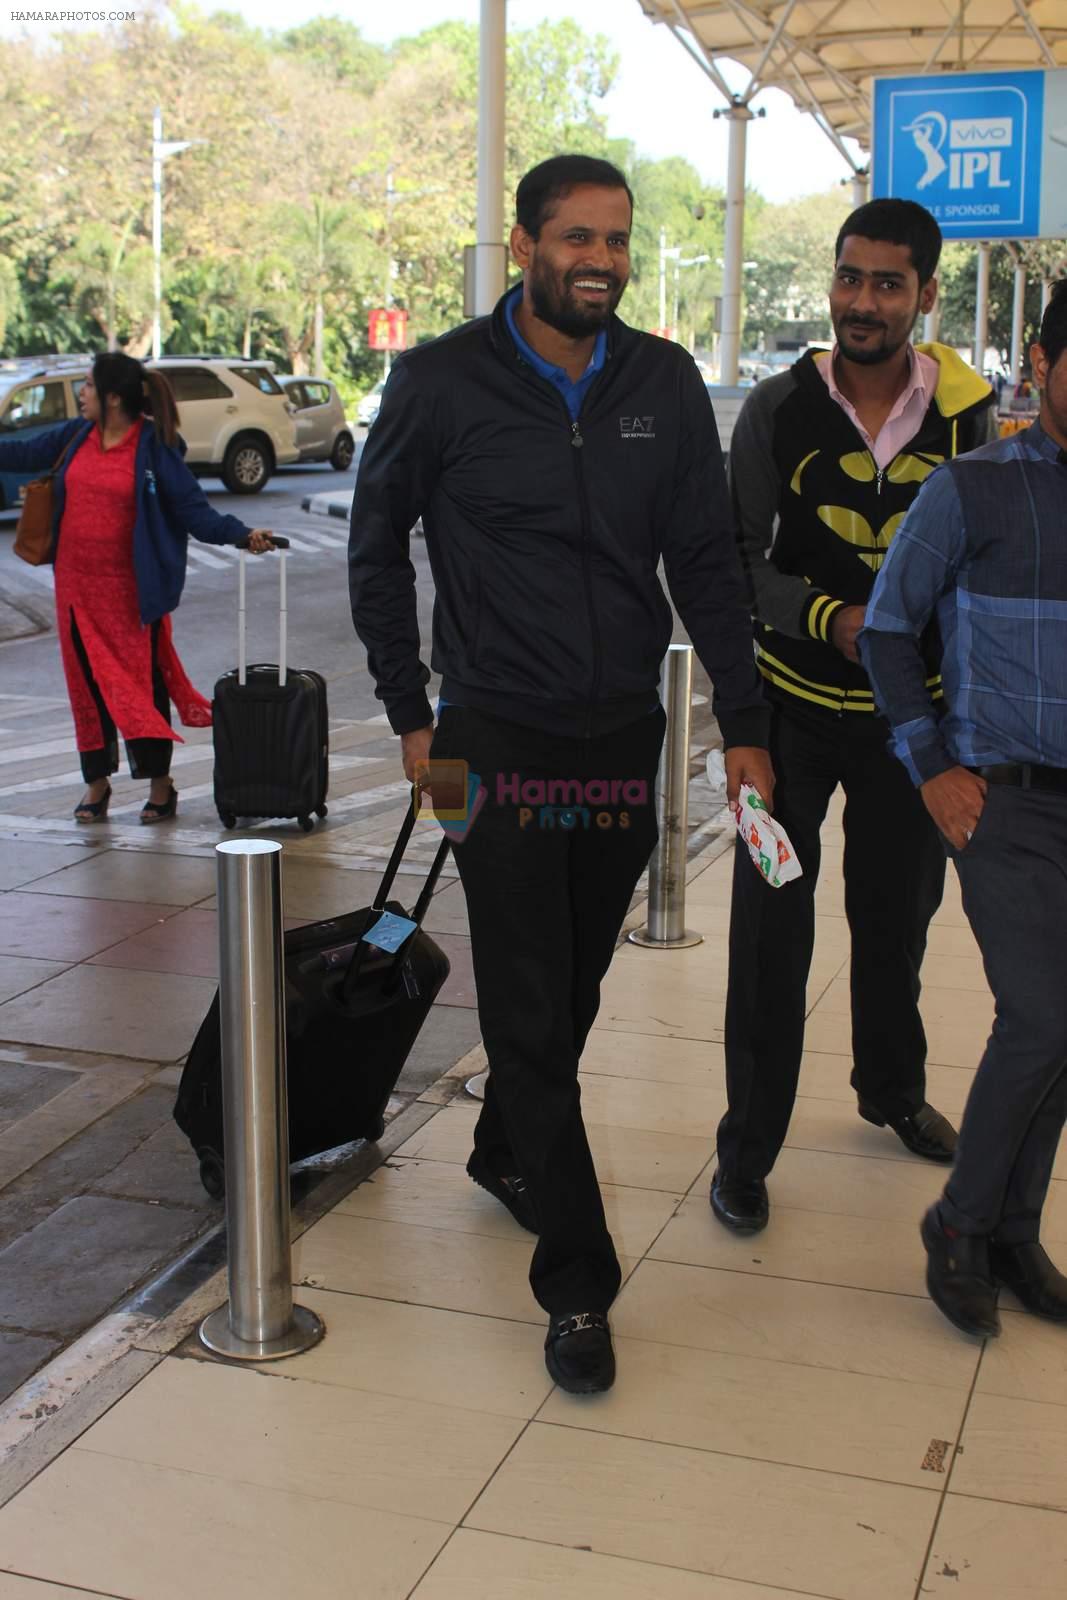 Yusuf Pathan snapped at the airport on 21st Jan 2016